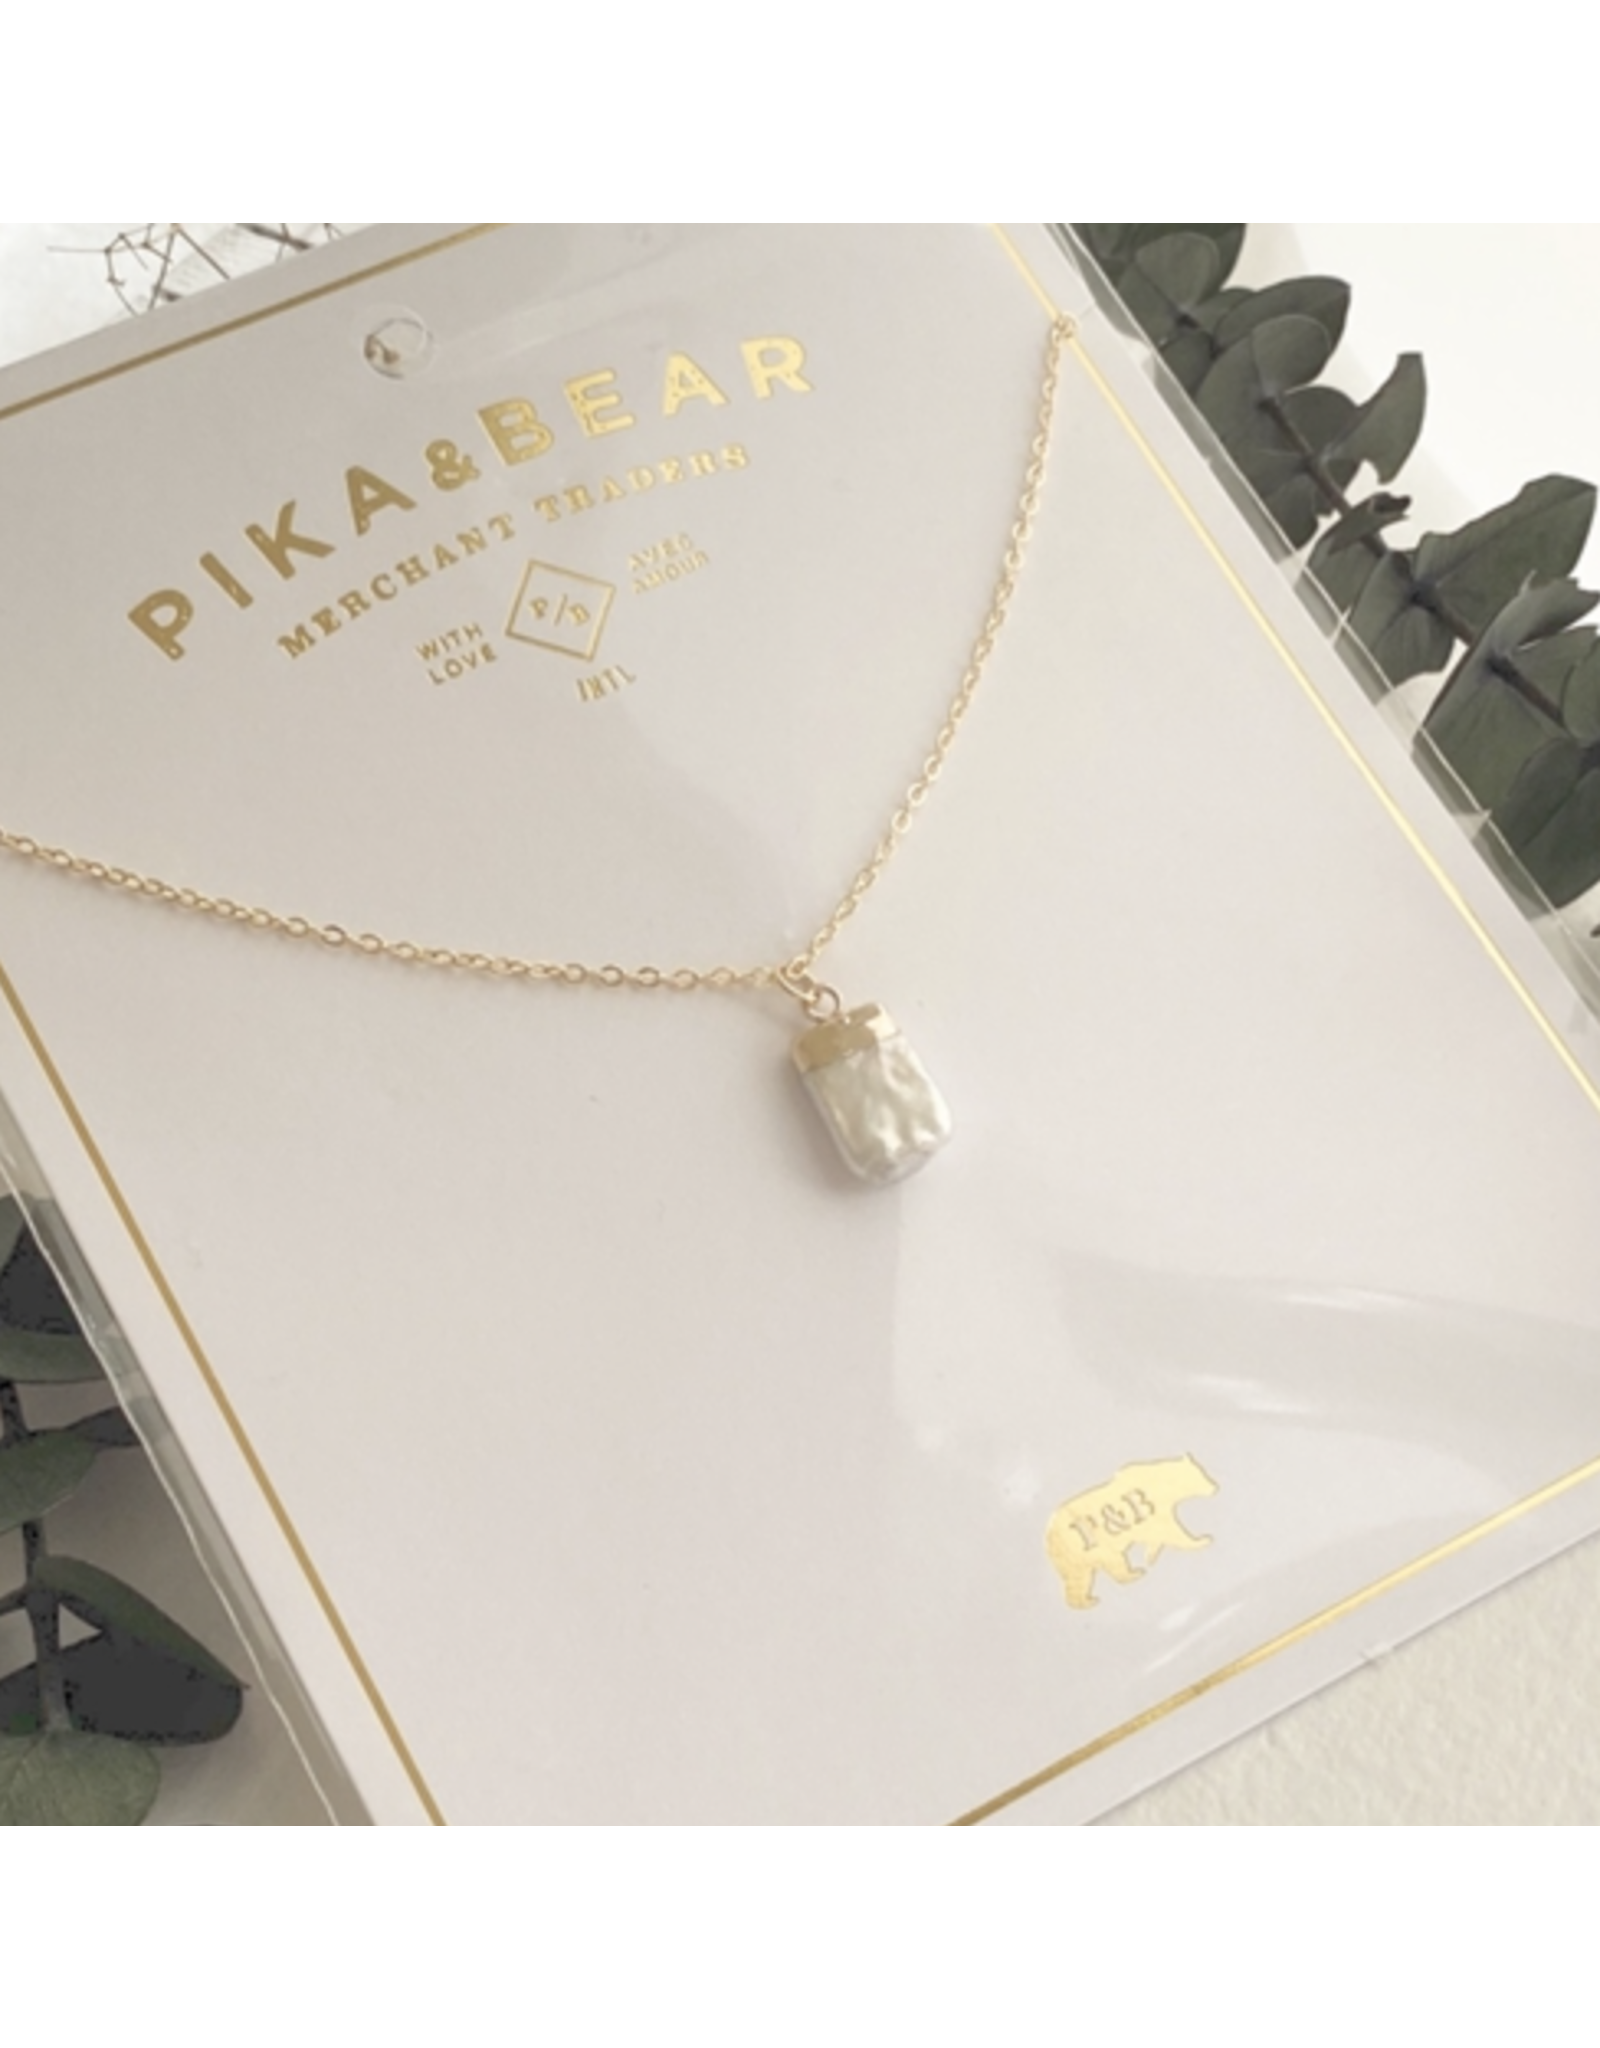 Pika & Bear Marquesas Square Pearl Charm Necklace - Gold